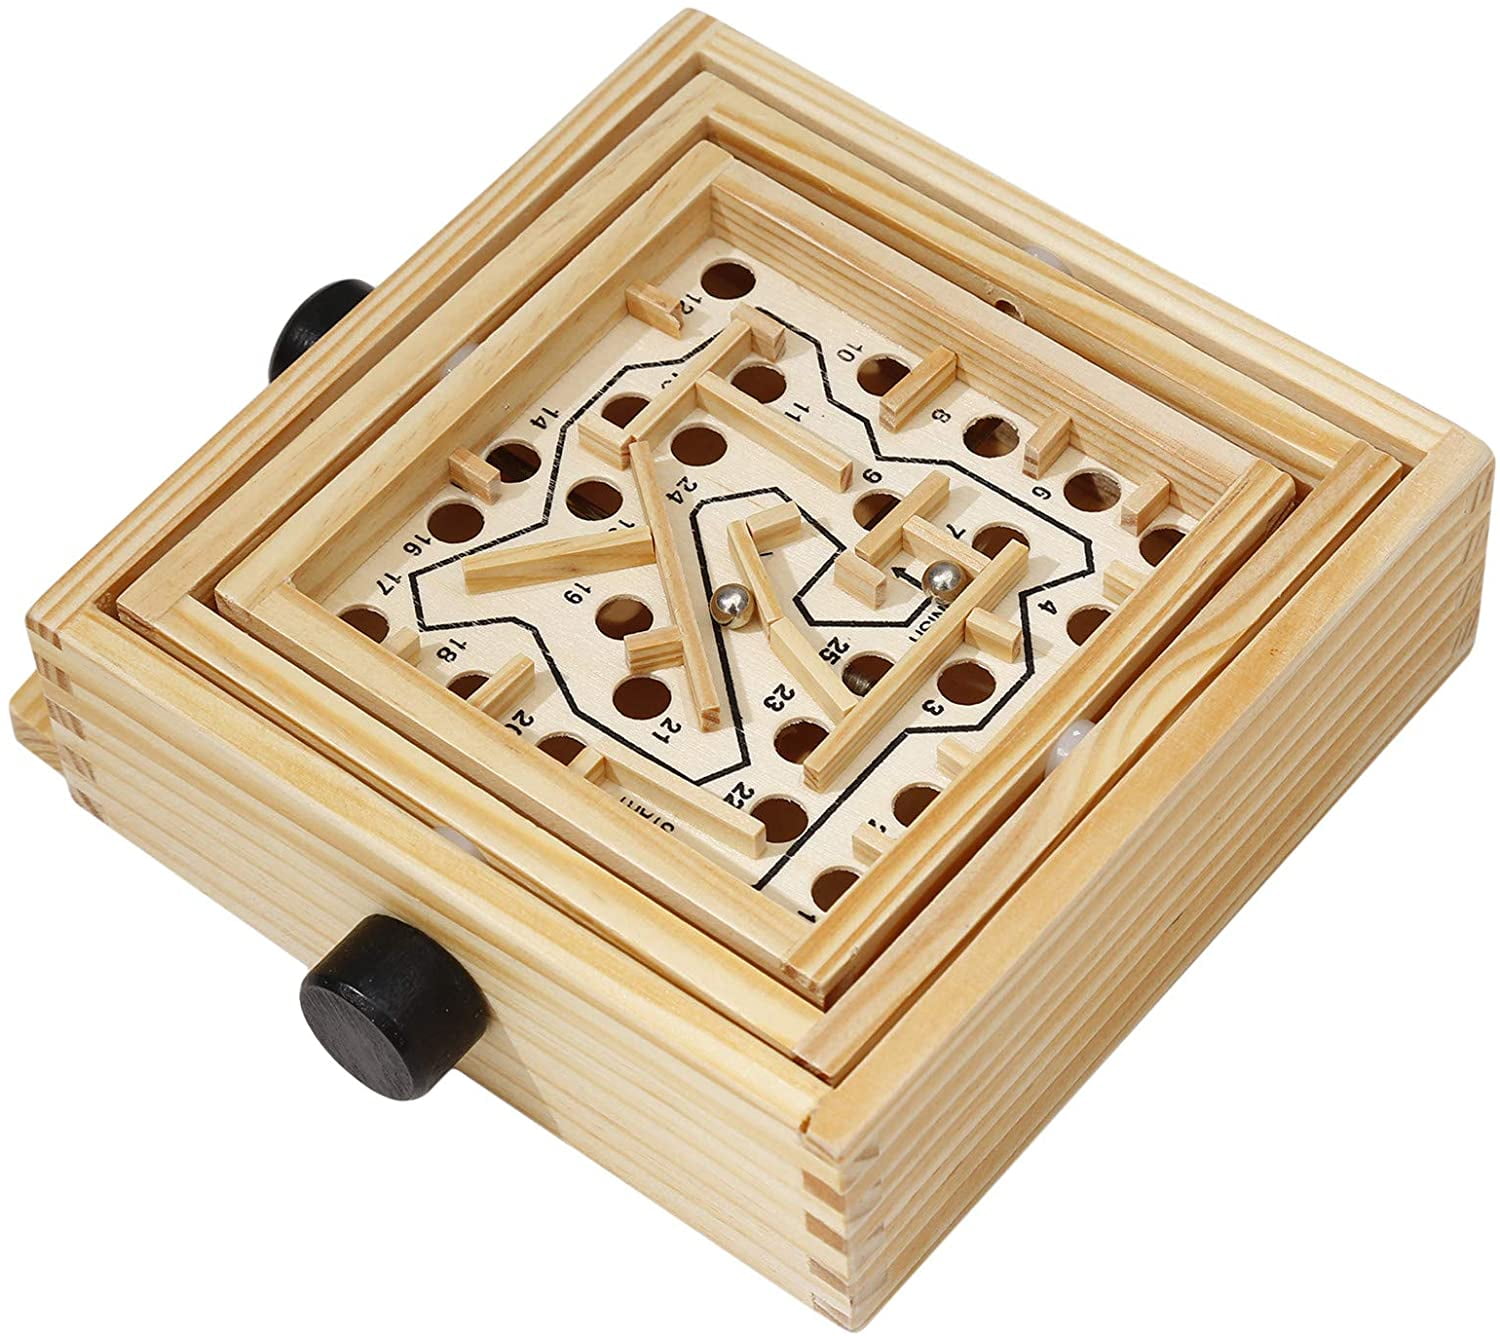 Balance Board Game Toy Wooden Labyrinth Maze Game Aged 6 Years old R 